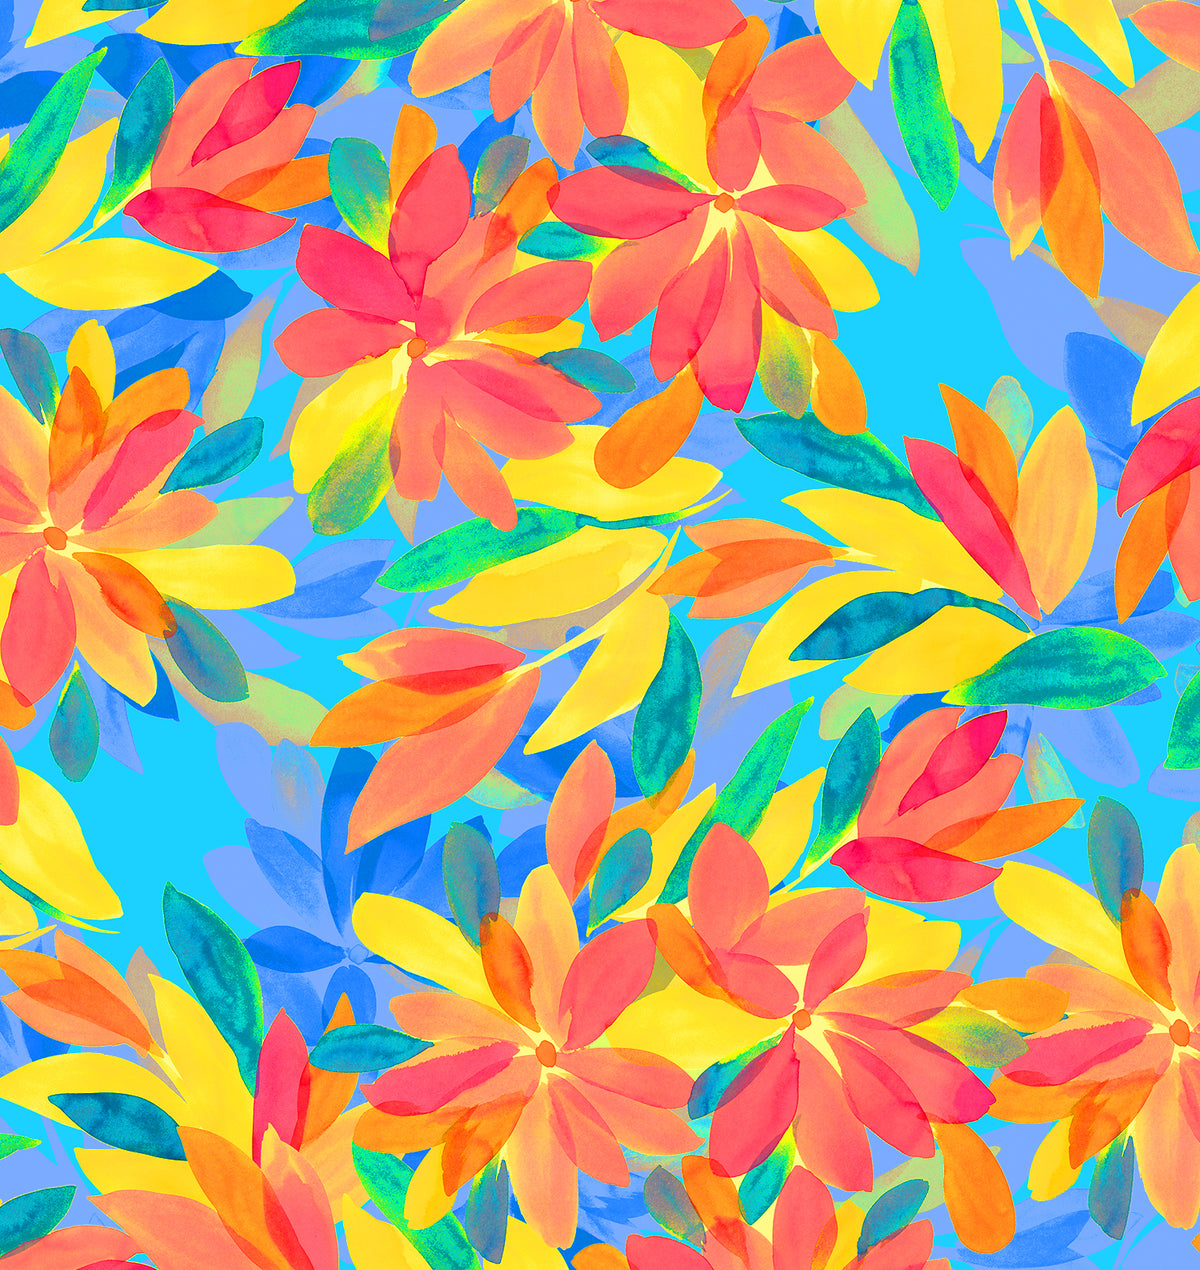 Sunsets Shoreline Petals rainbow-colored print with watercolor flowers on a blue background